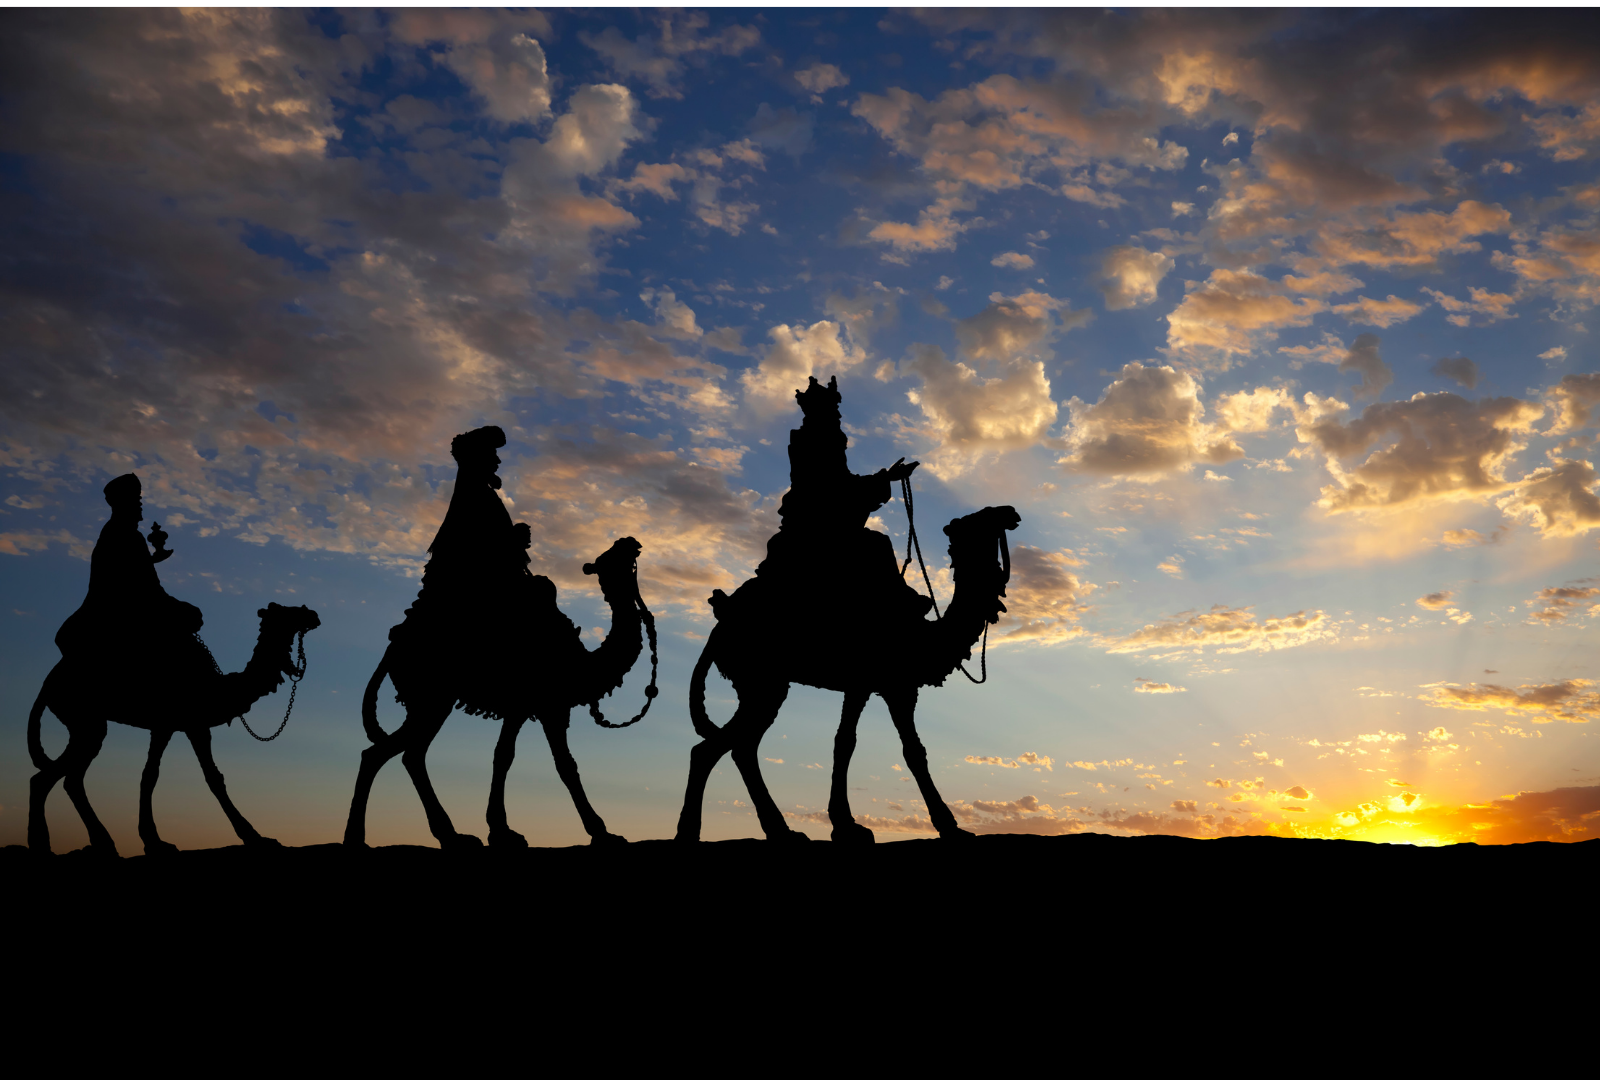 three kings on camels